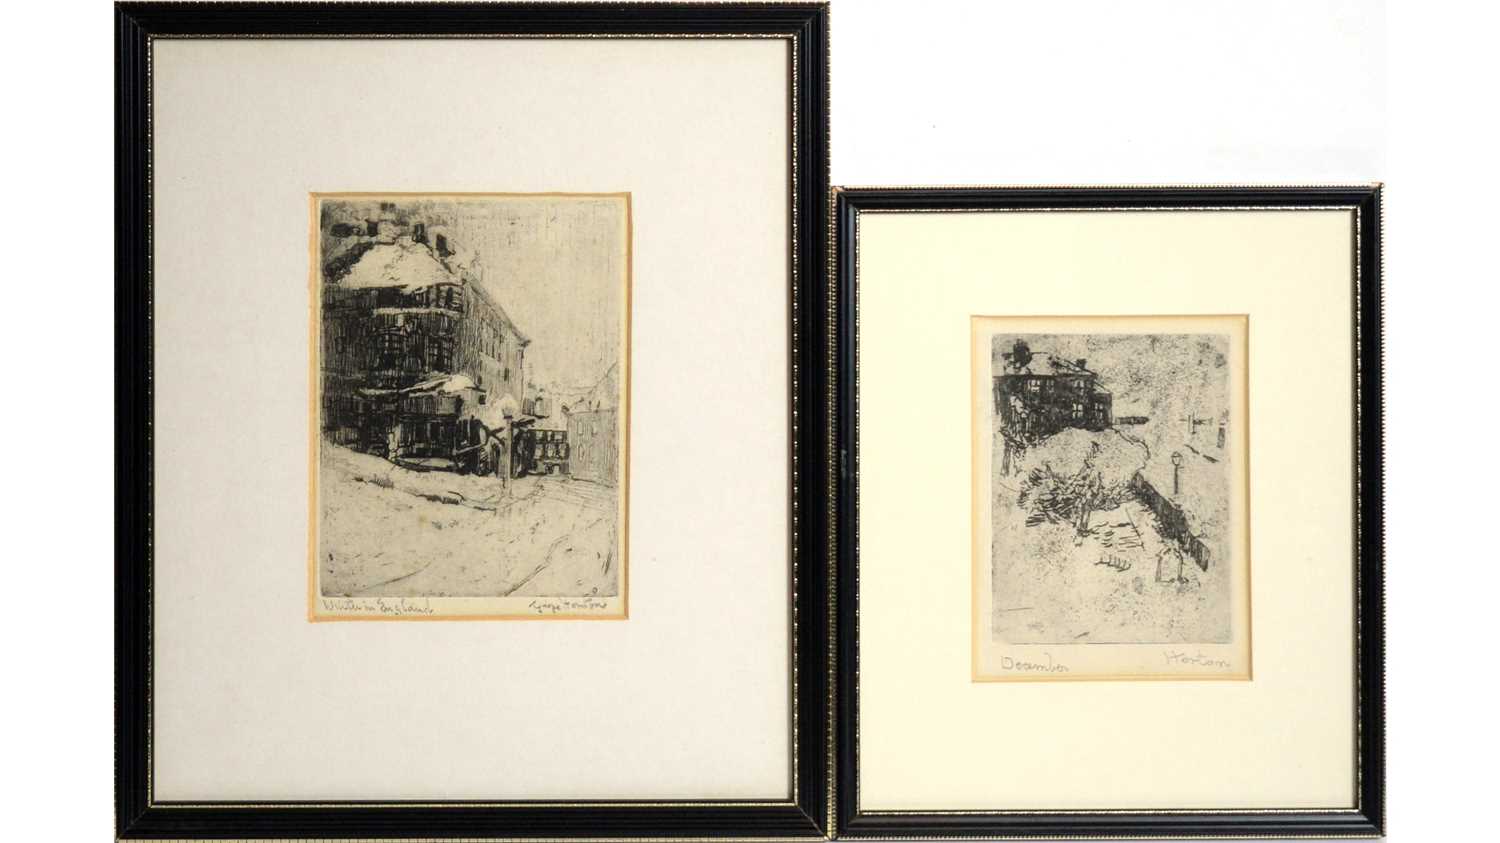 Lot 6 - George Edward Horton - Two snow scenes; December, and Winter in England | etchings